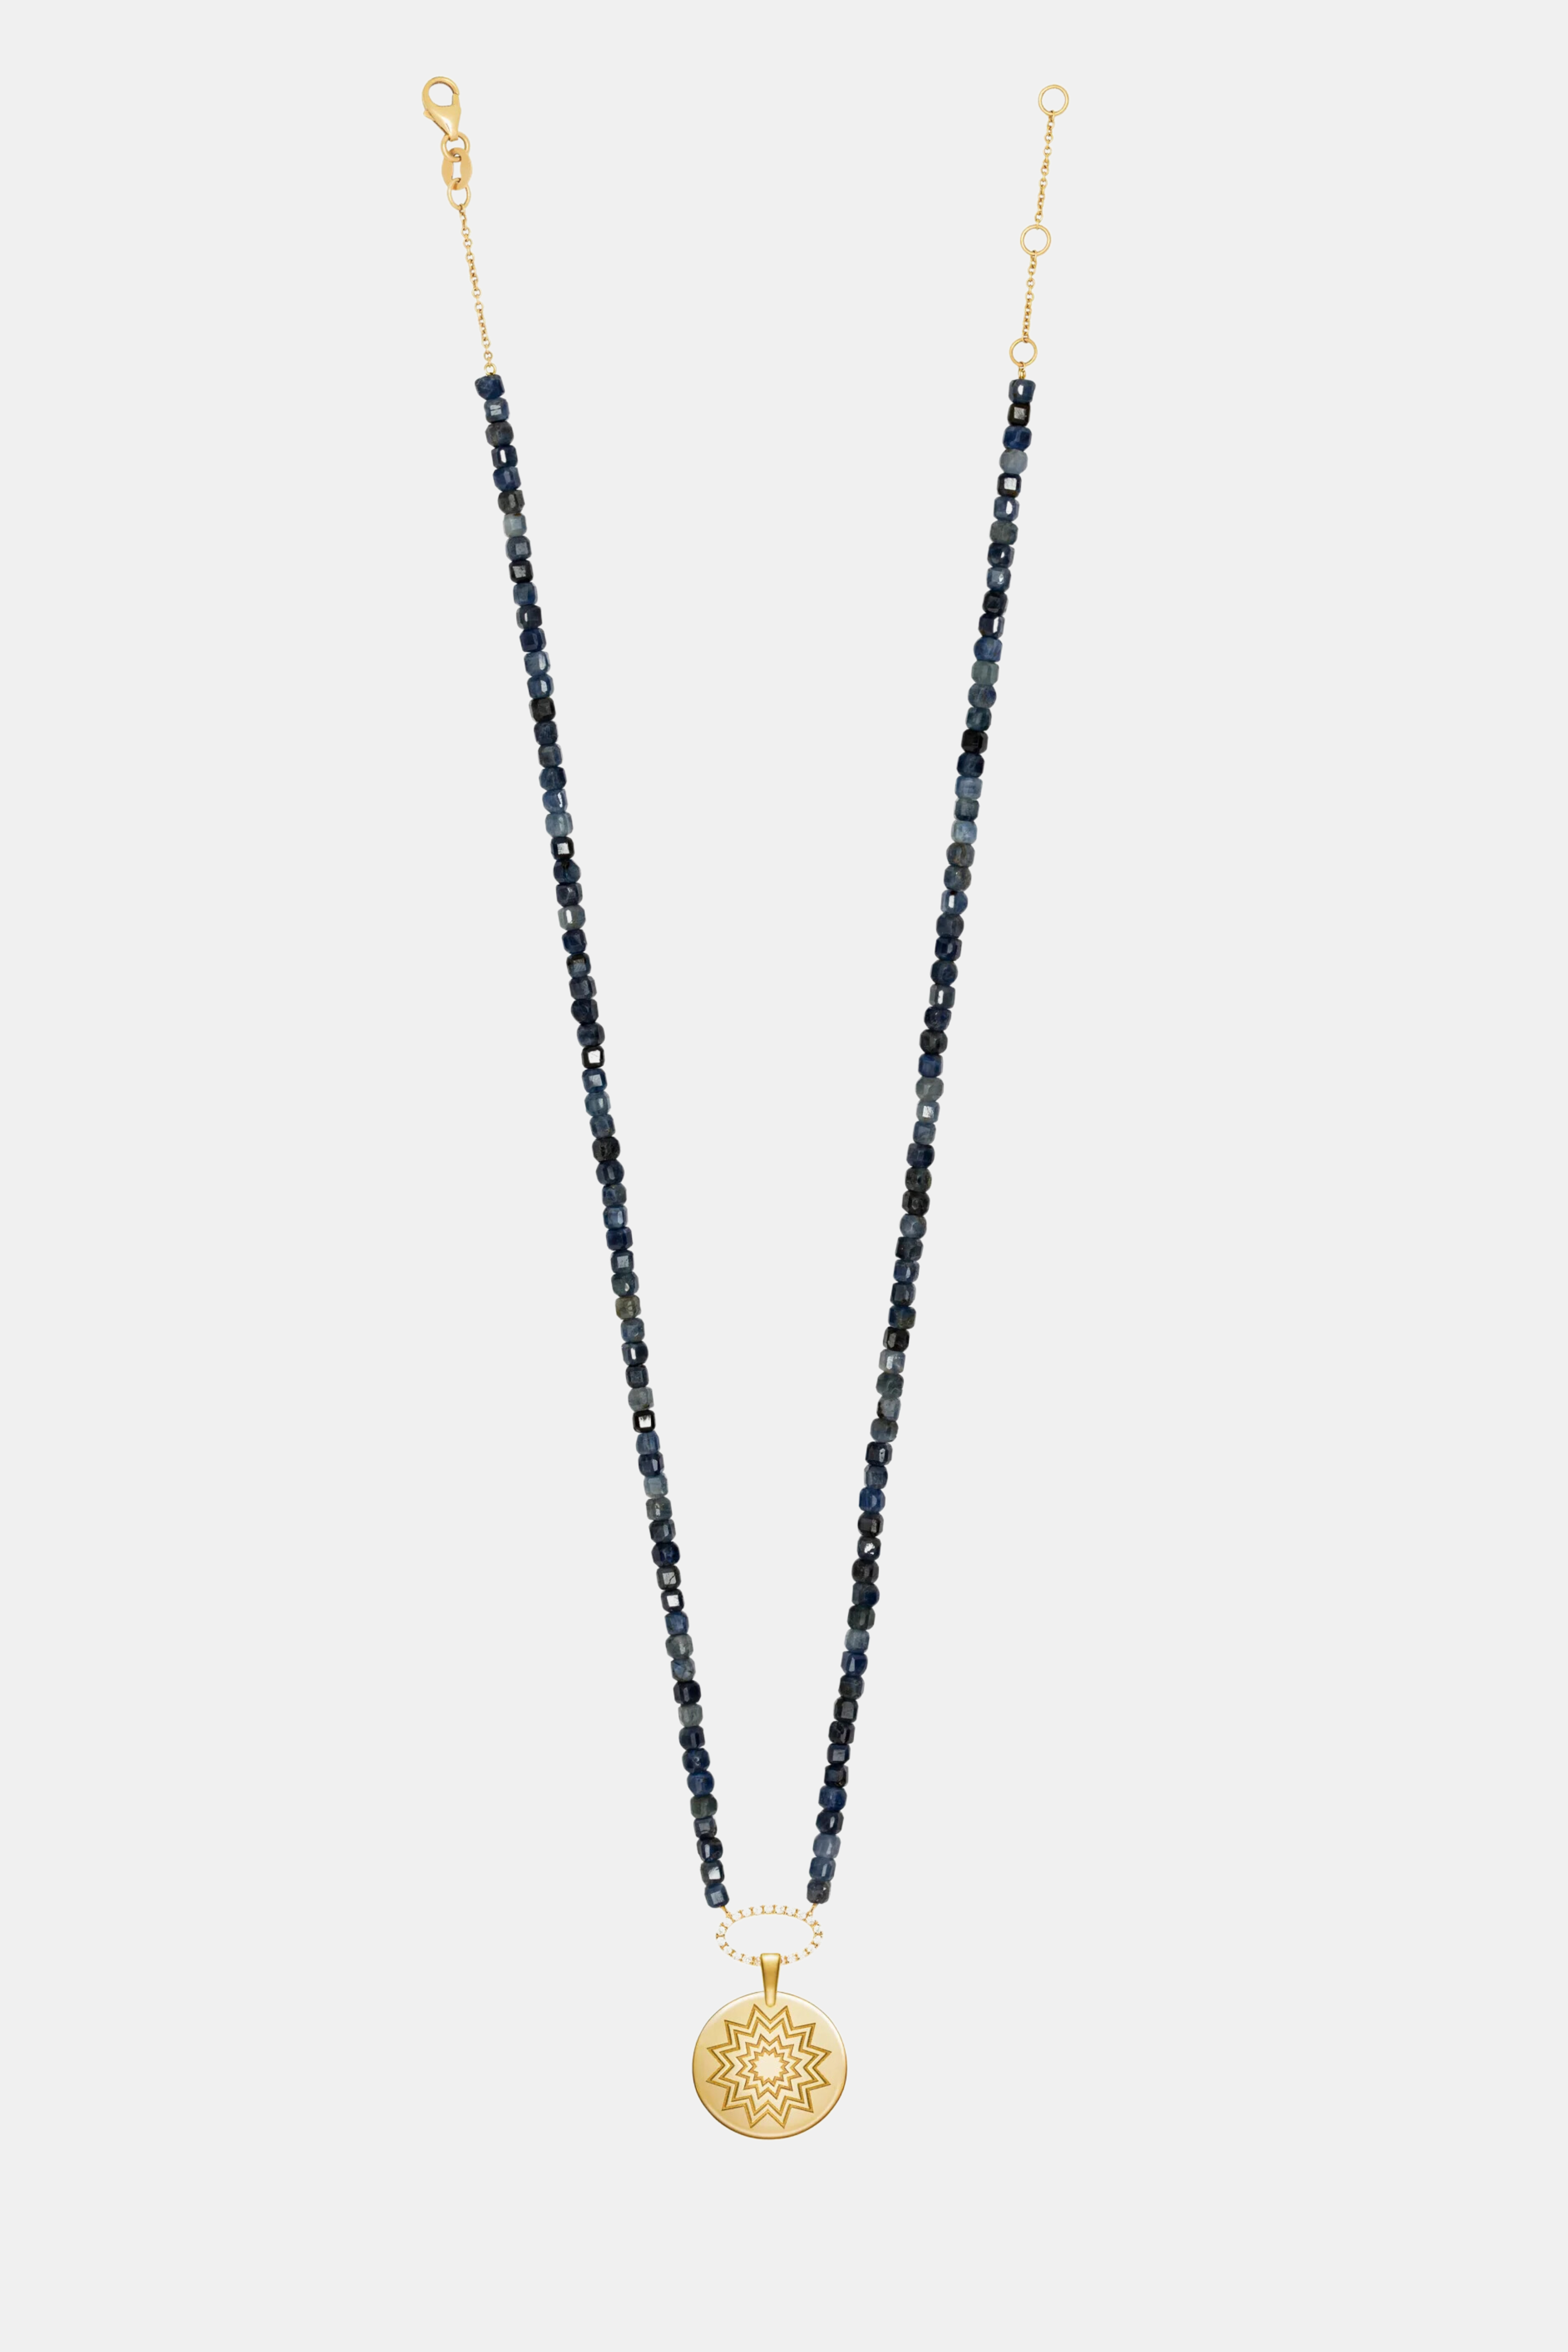 Sapphire Beaded Necklace With Multistar Pendant